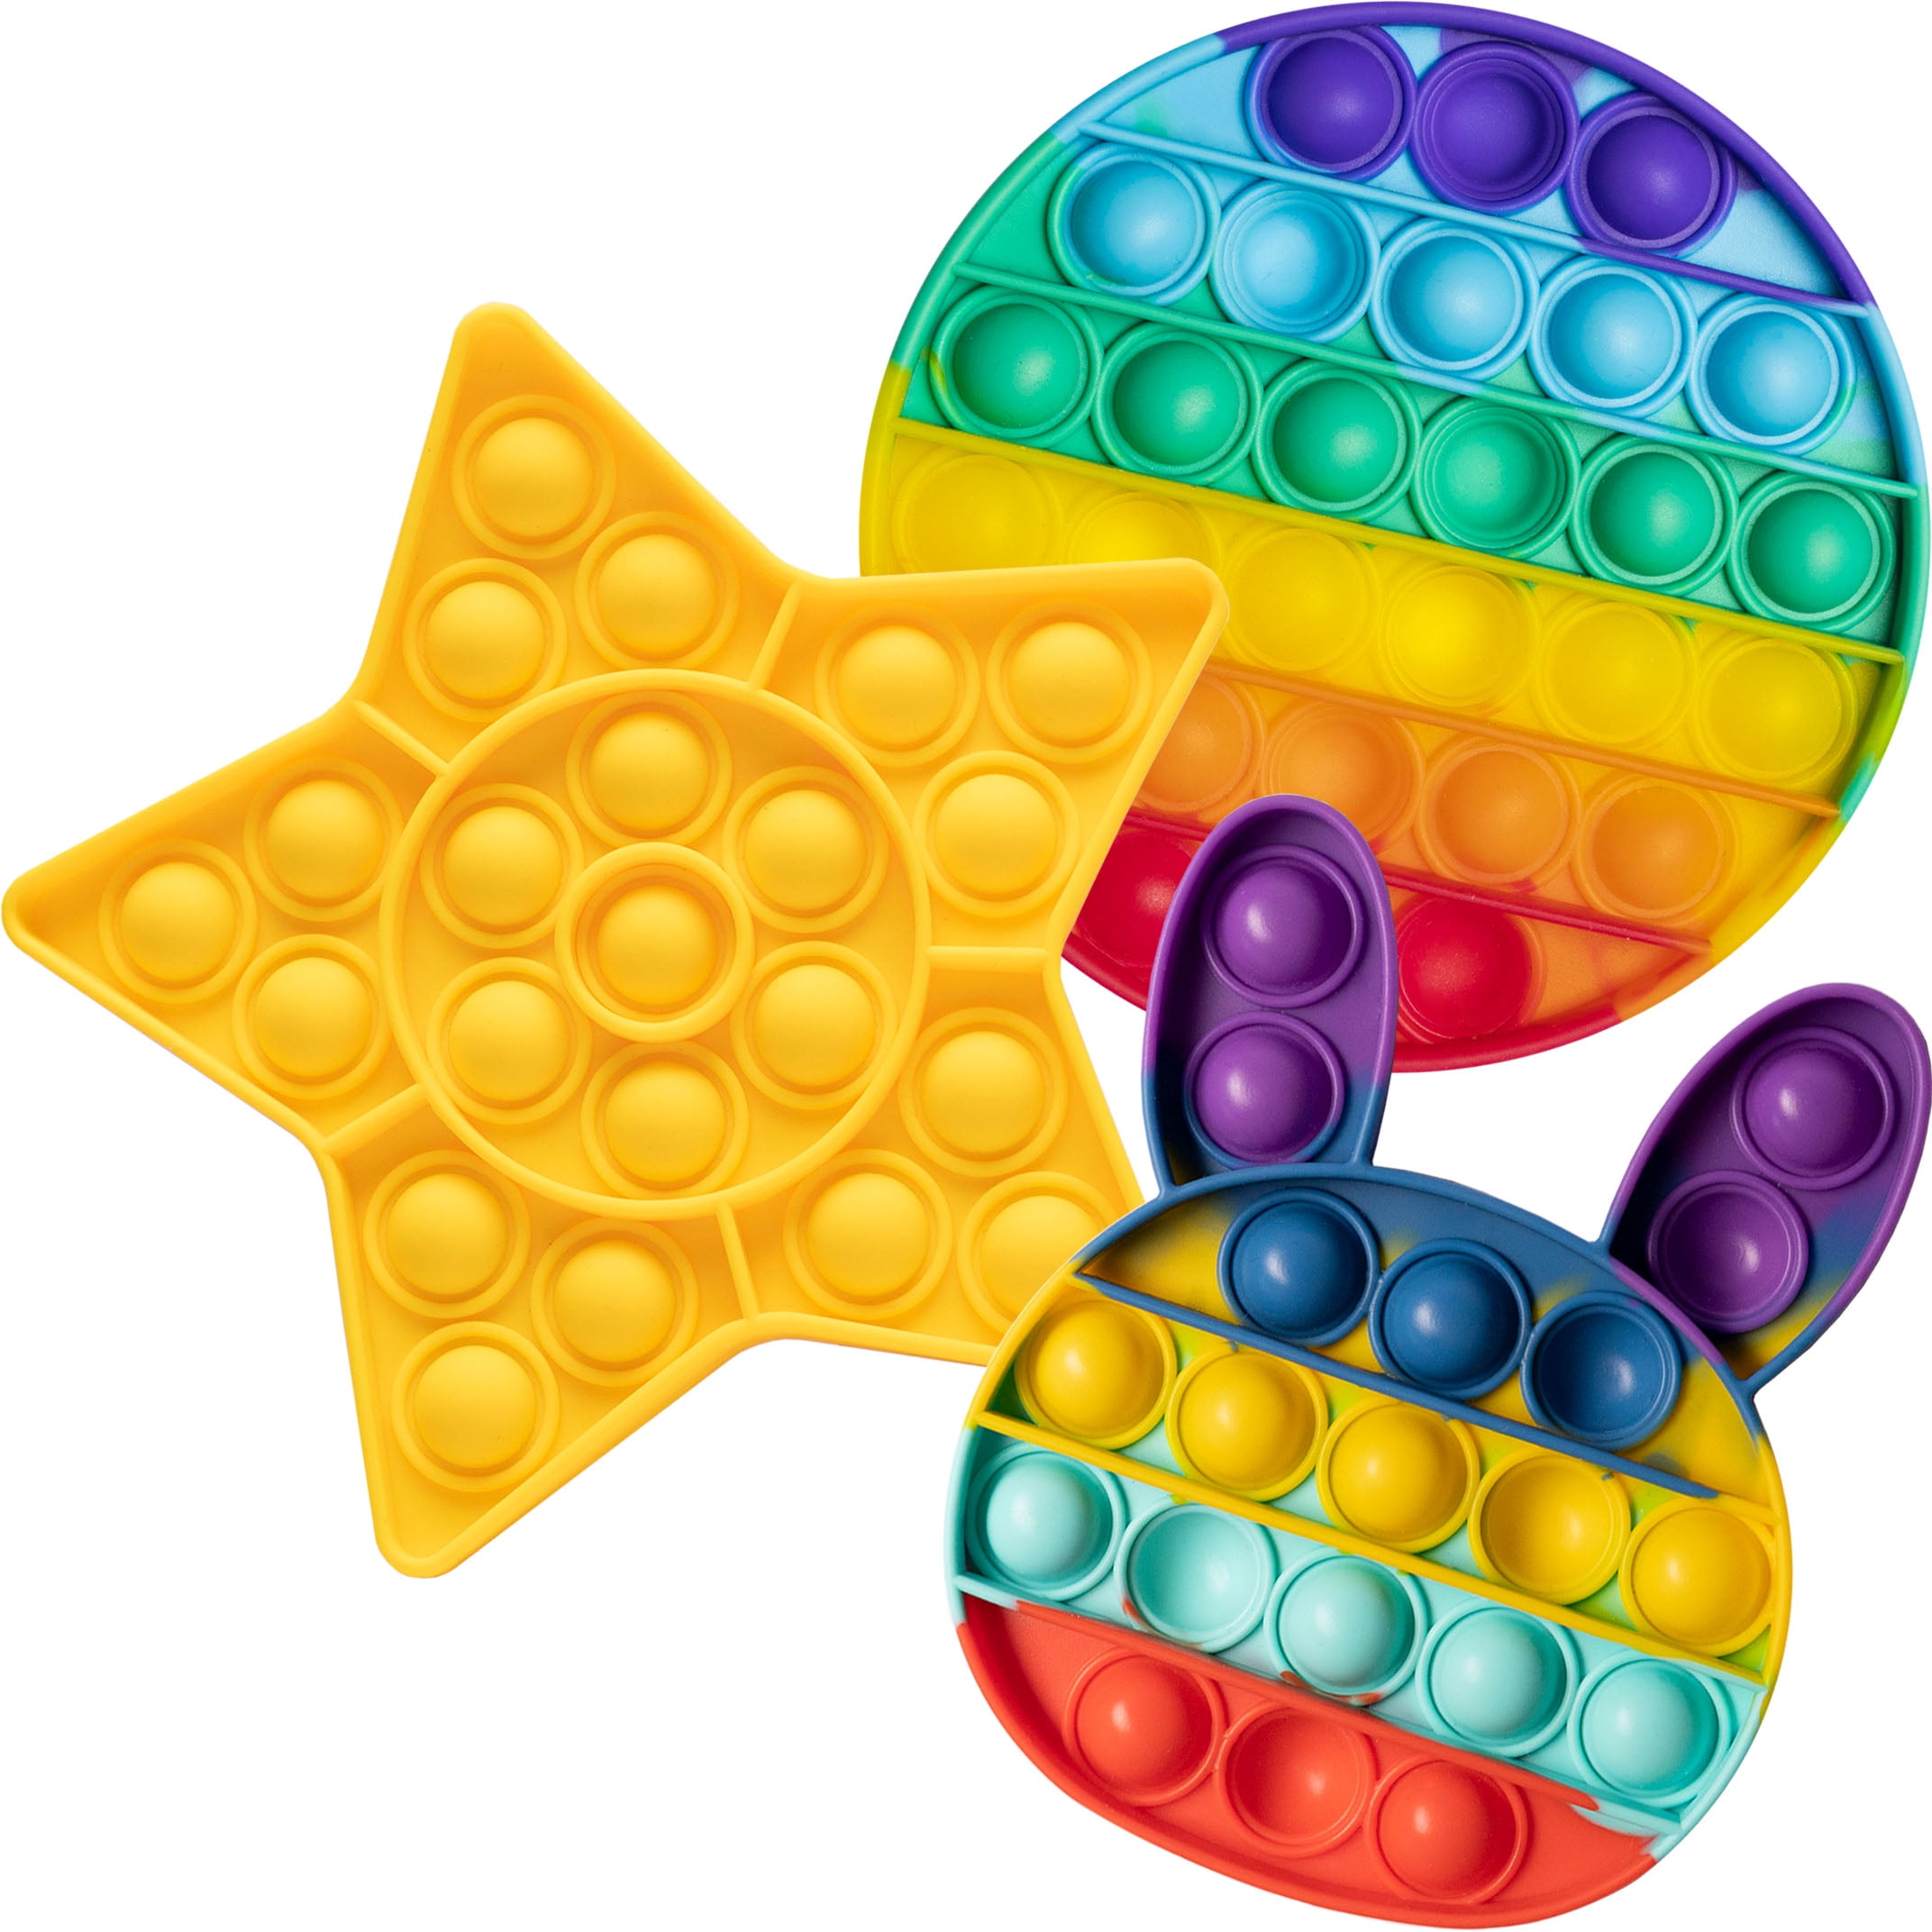 Silicone Anxiety Reliever Toy Squeeze Sensory Autism Special Needs Stress Reliever for Girls Boys Teens Men Rainbow Pop Fidget Toys for Kids Adults 3 Pack Push Pop Bubble Sensory Fidget Toy 